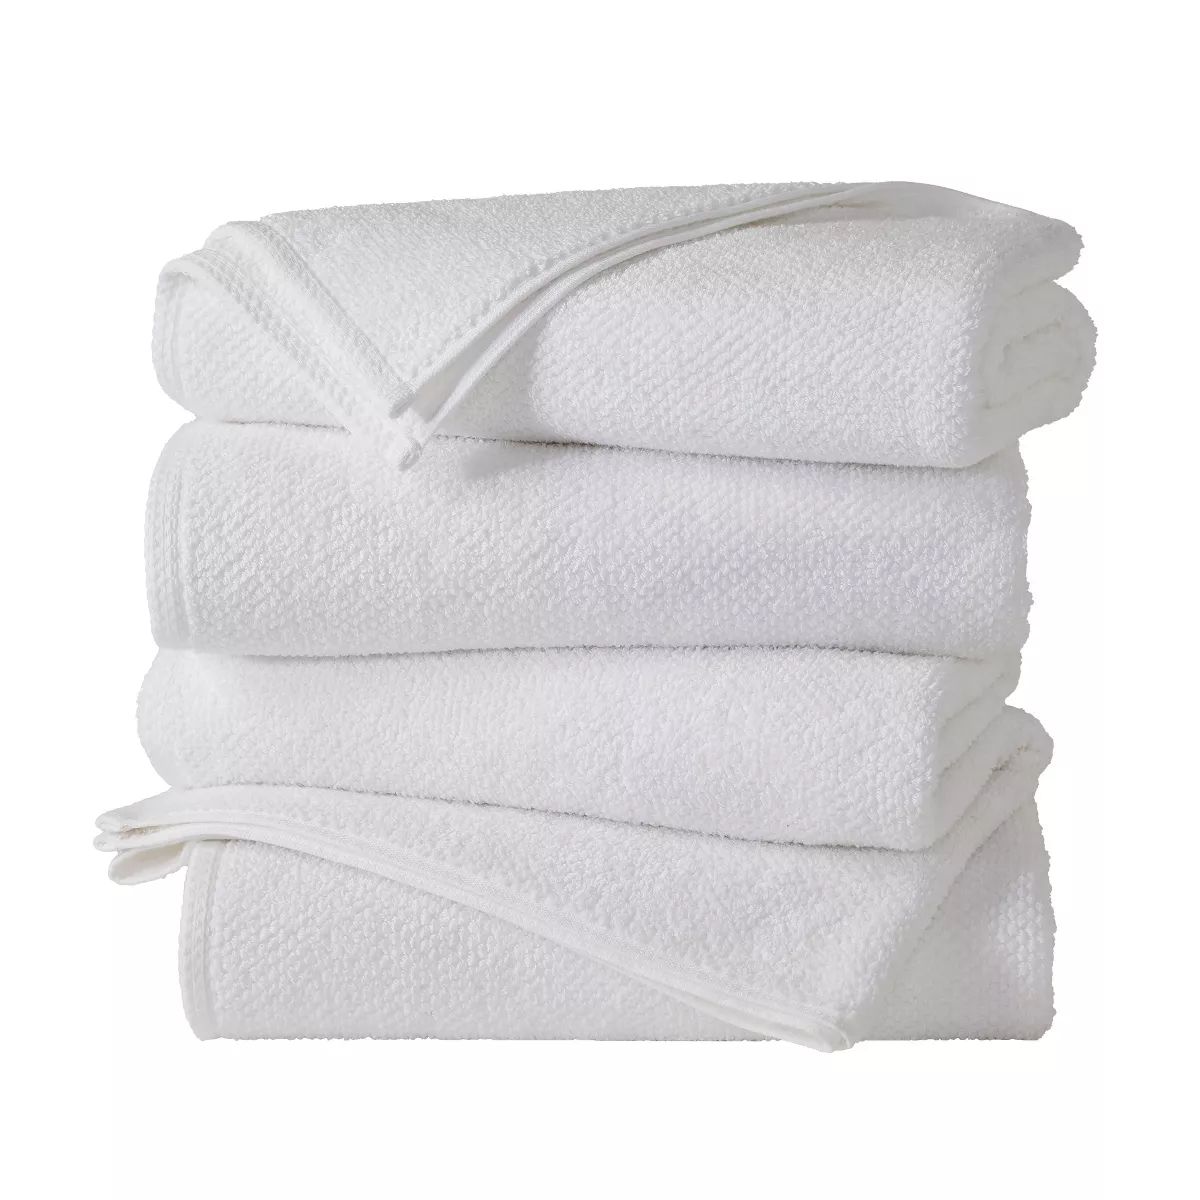 Cotton Quick Dry Popcorn Towel Set - Great Bay Home | Target